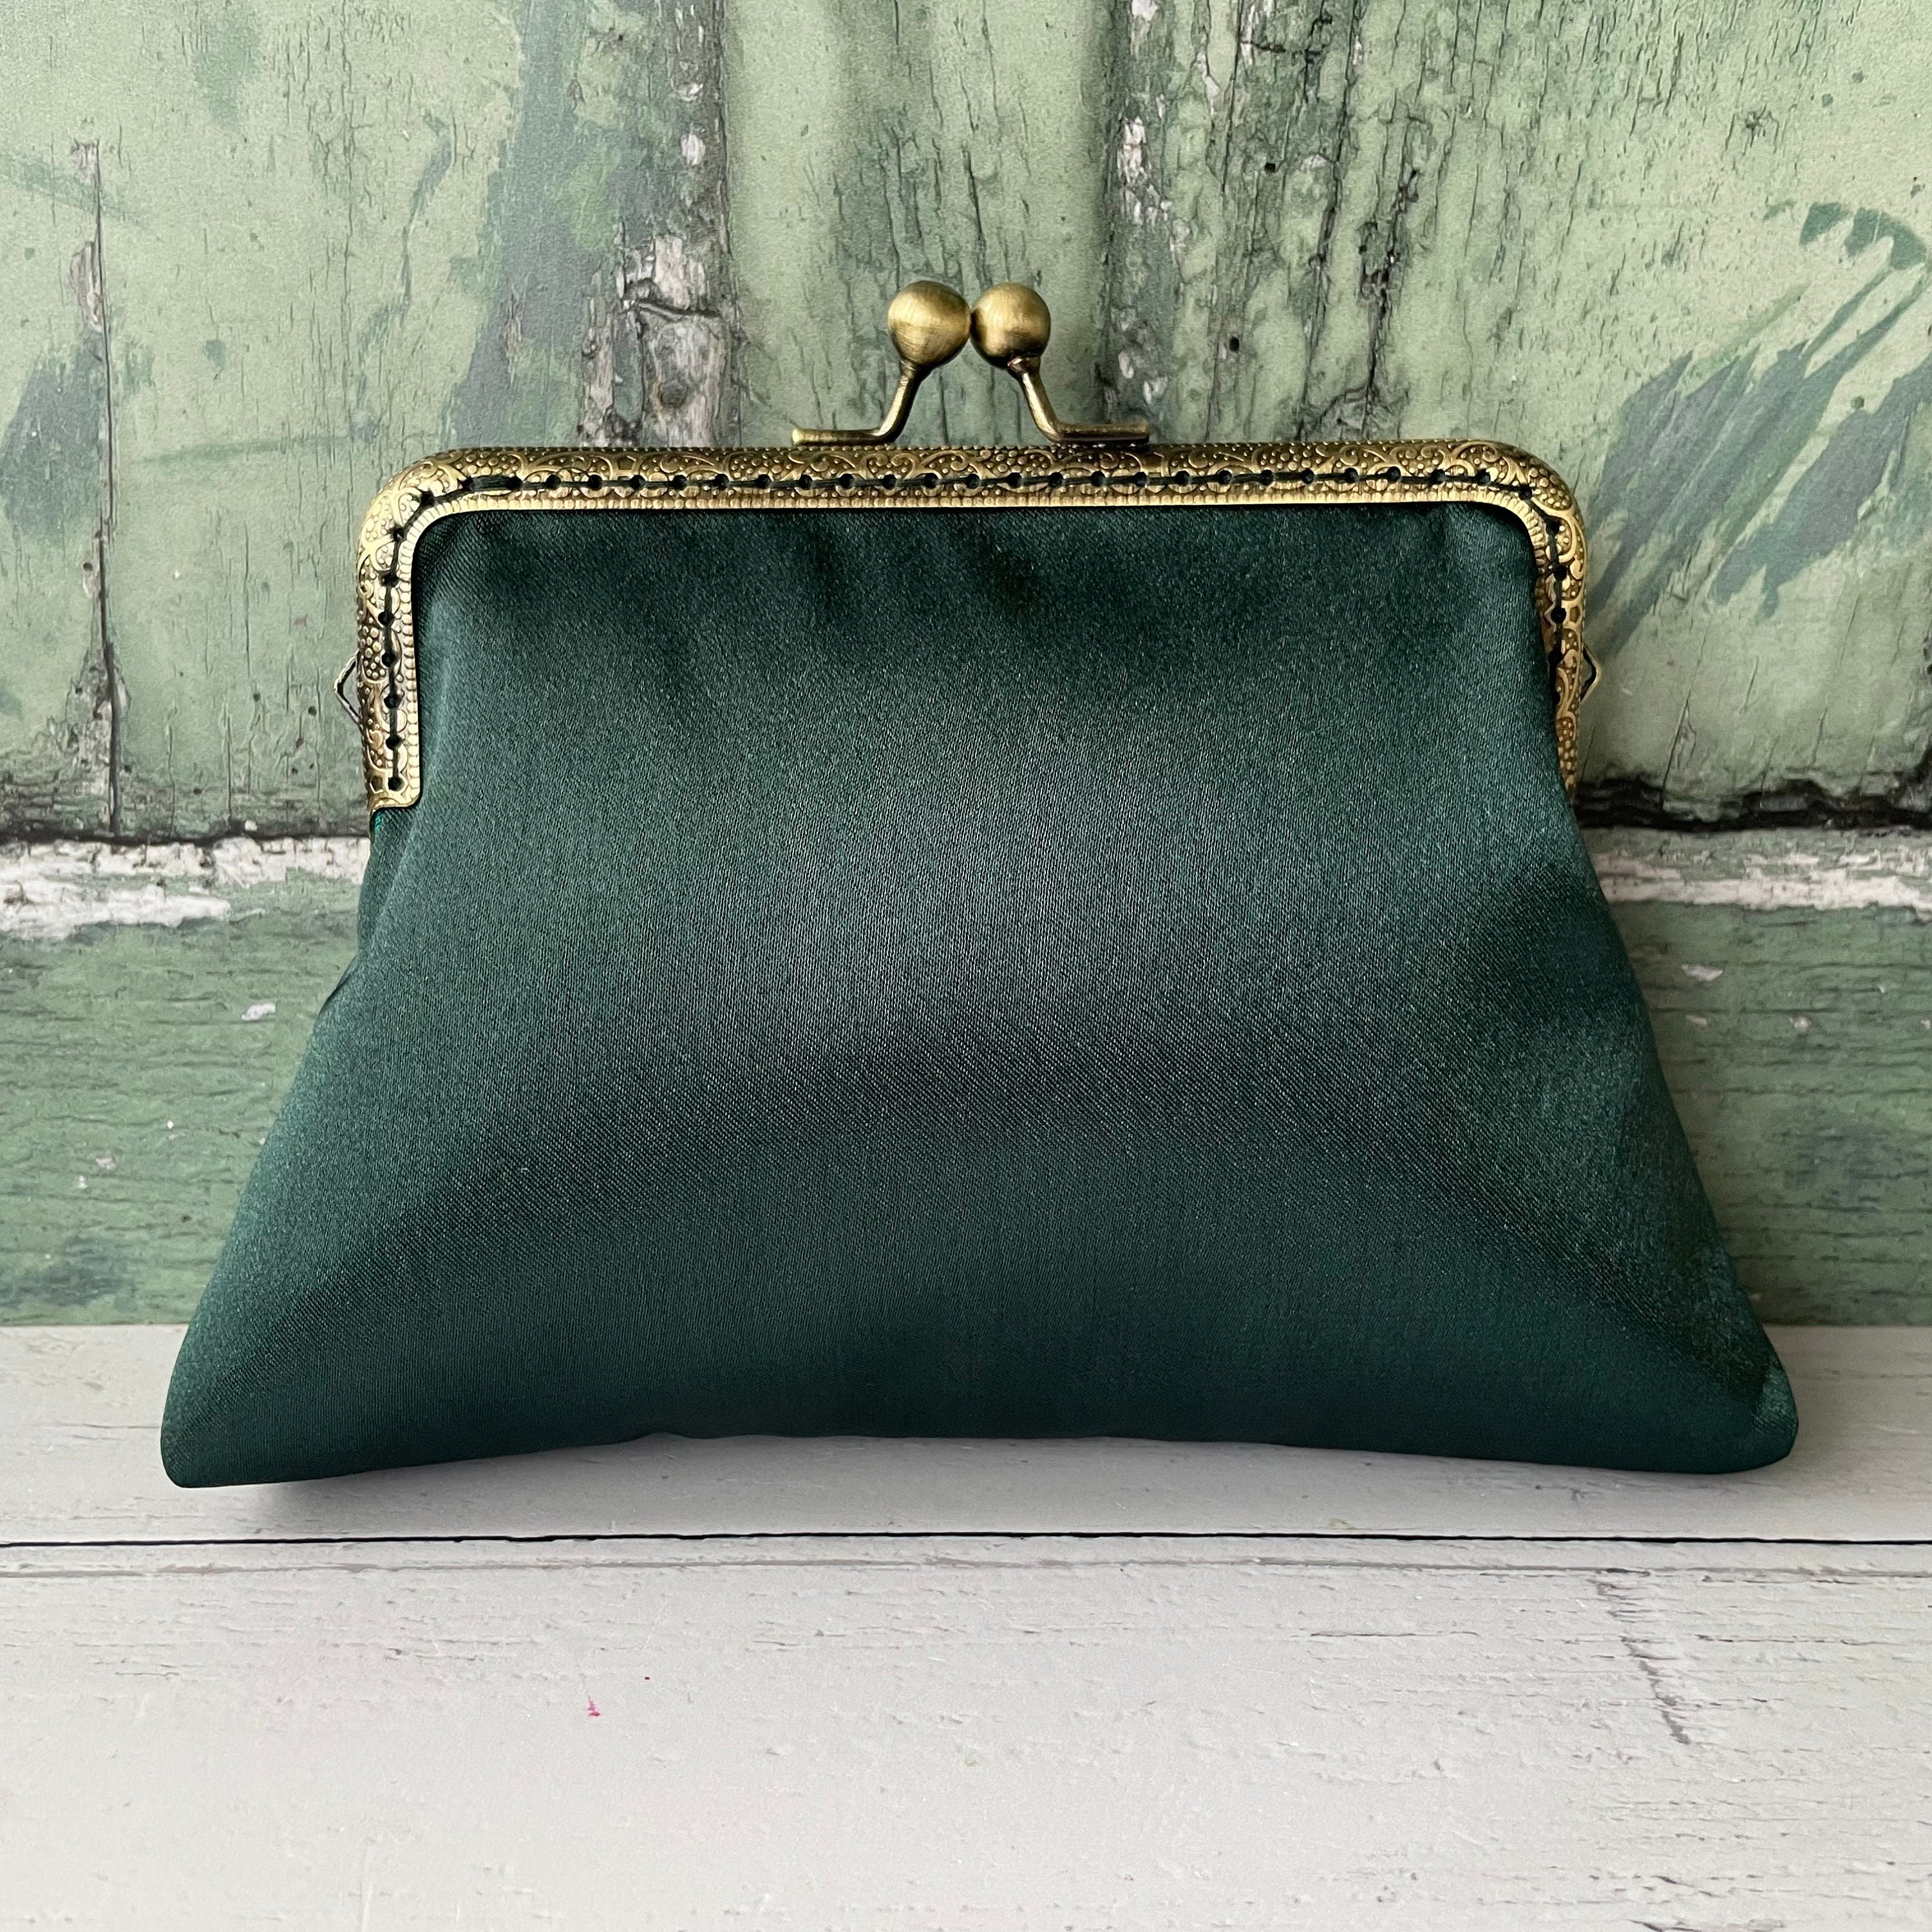 Velvet Emerald Green Clutch Purse, Bag Embroidered With Faux Diamonds,  Shoulder Strap and Handle for Wedding, Evening Party and Ethnic Wear. - Etsy